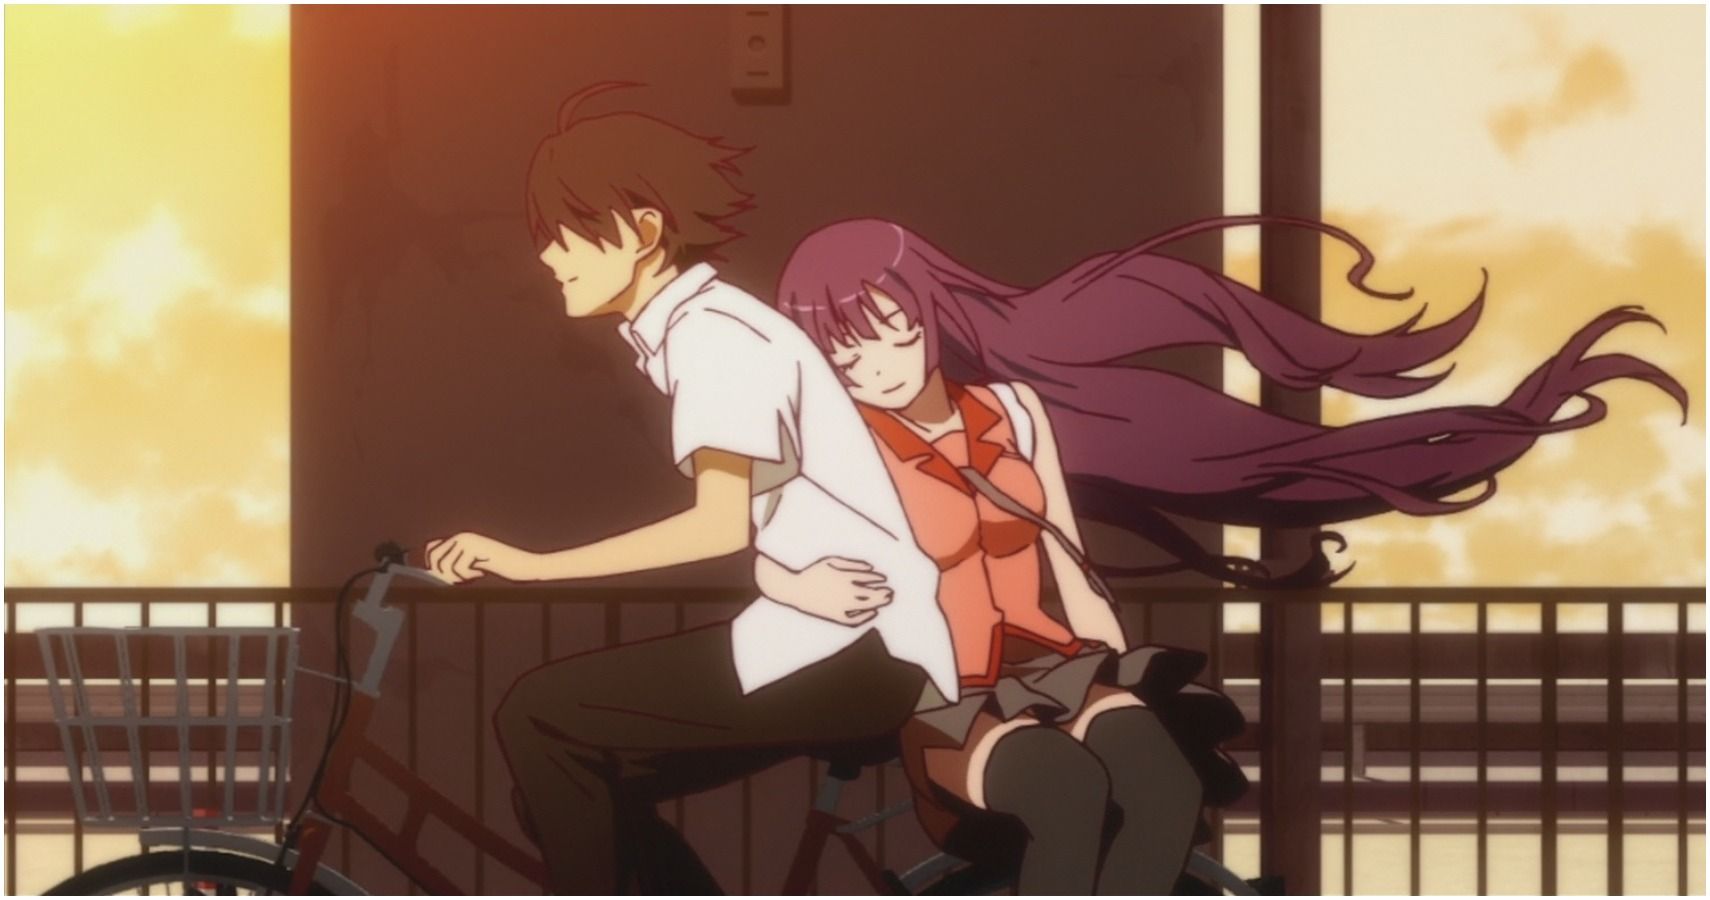 Monogatari: 10 Most Confusing Things About Its Story, Explained